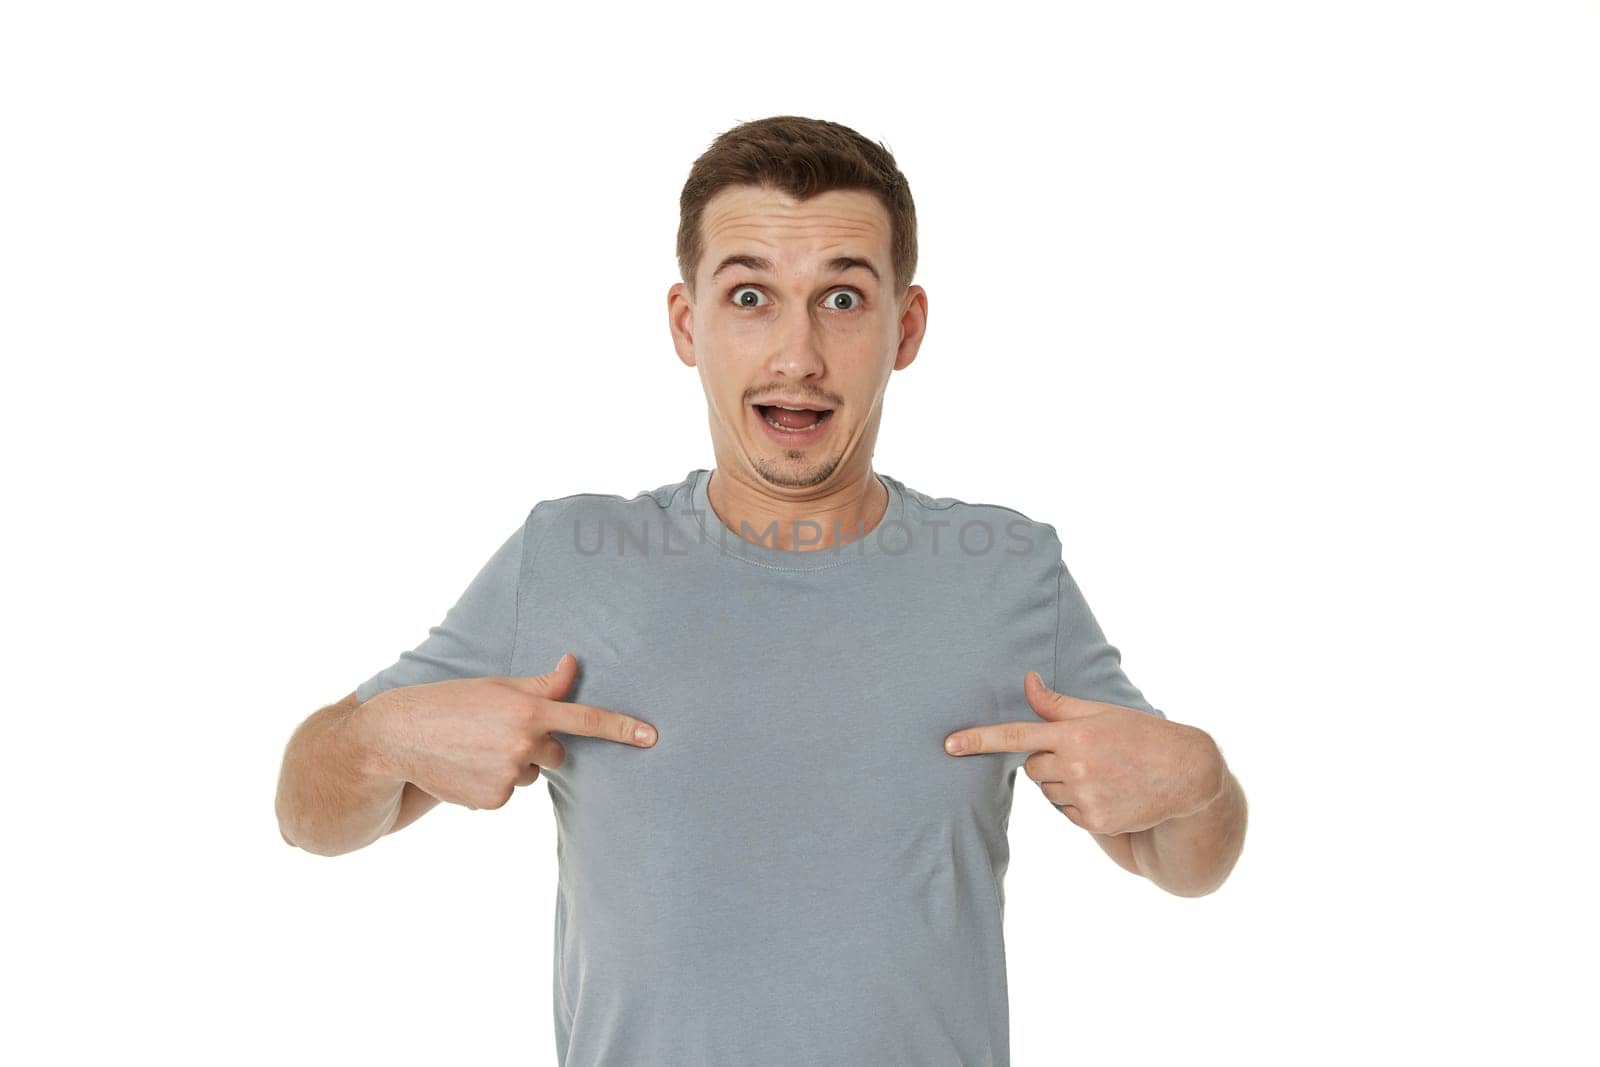 happy guy looking pointing at himself on white studio background